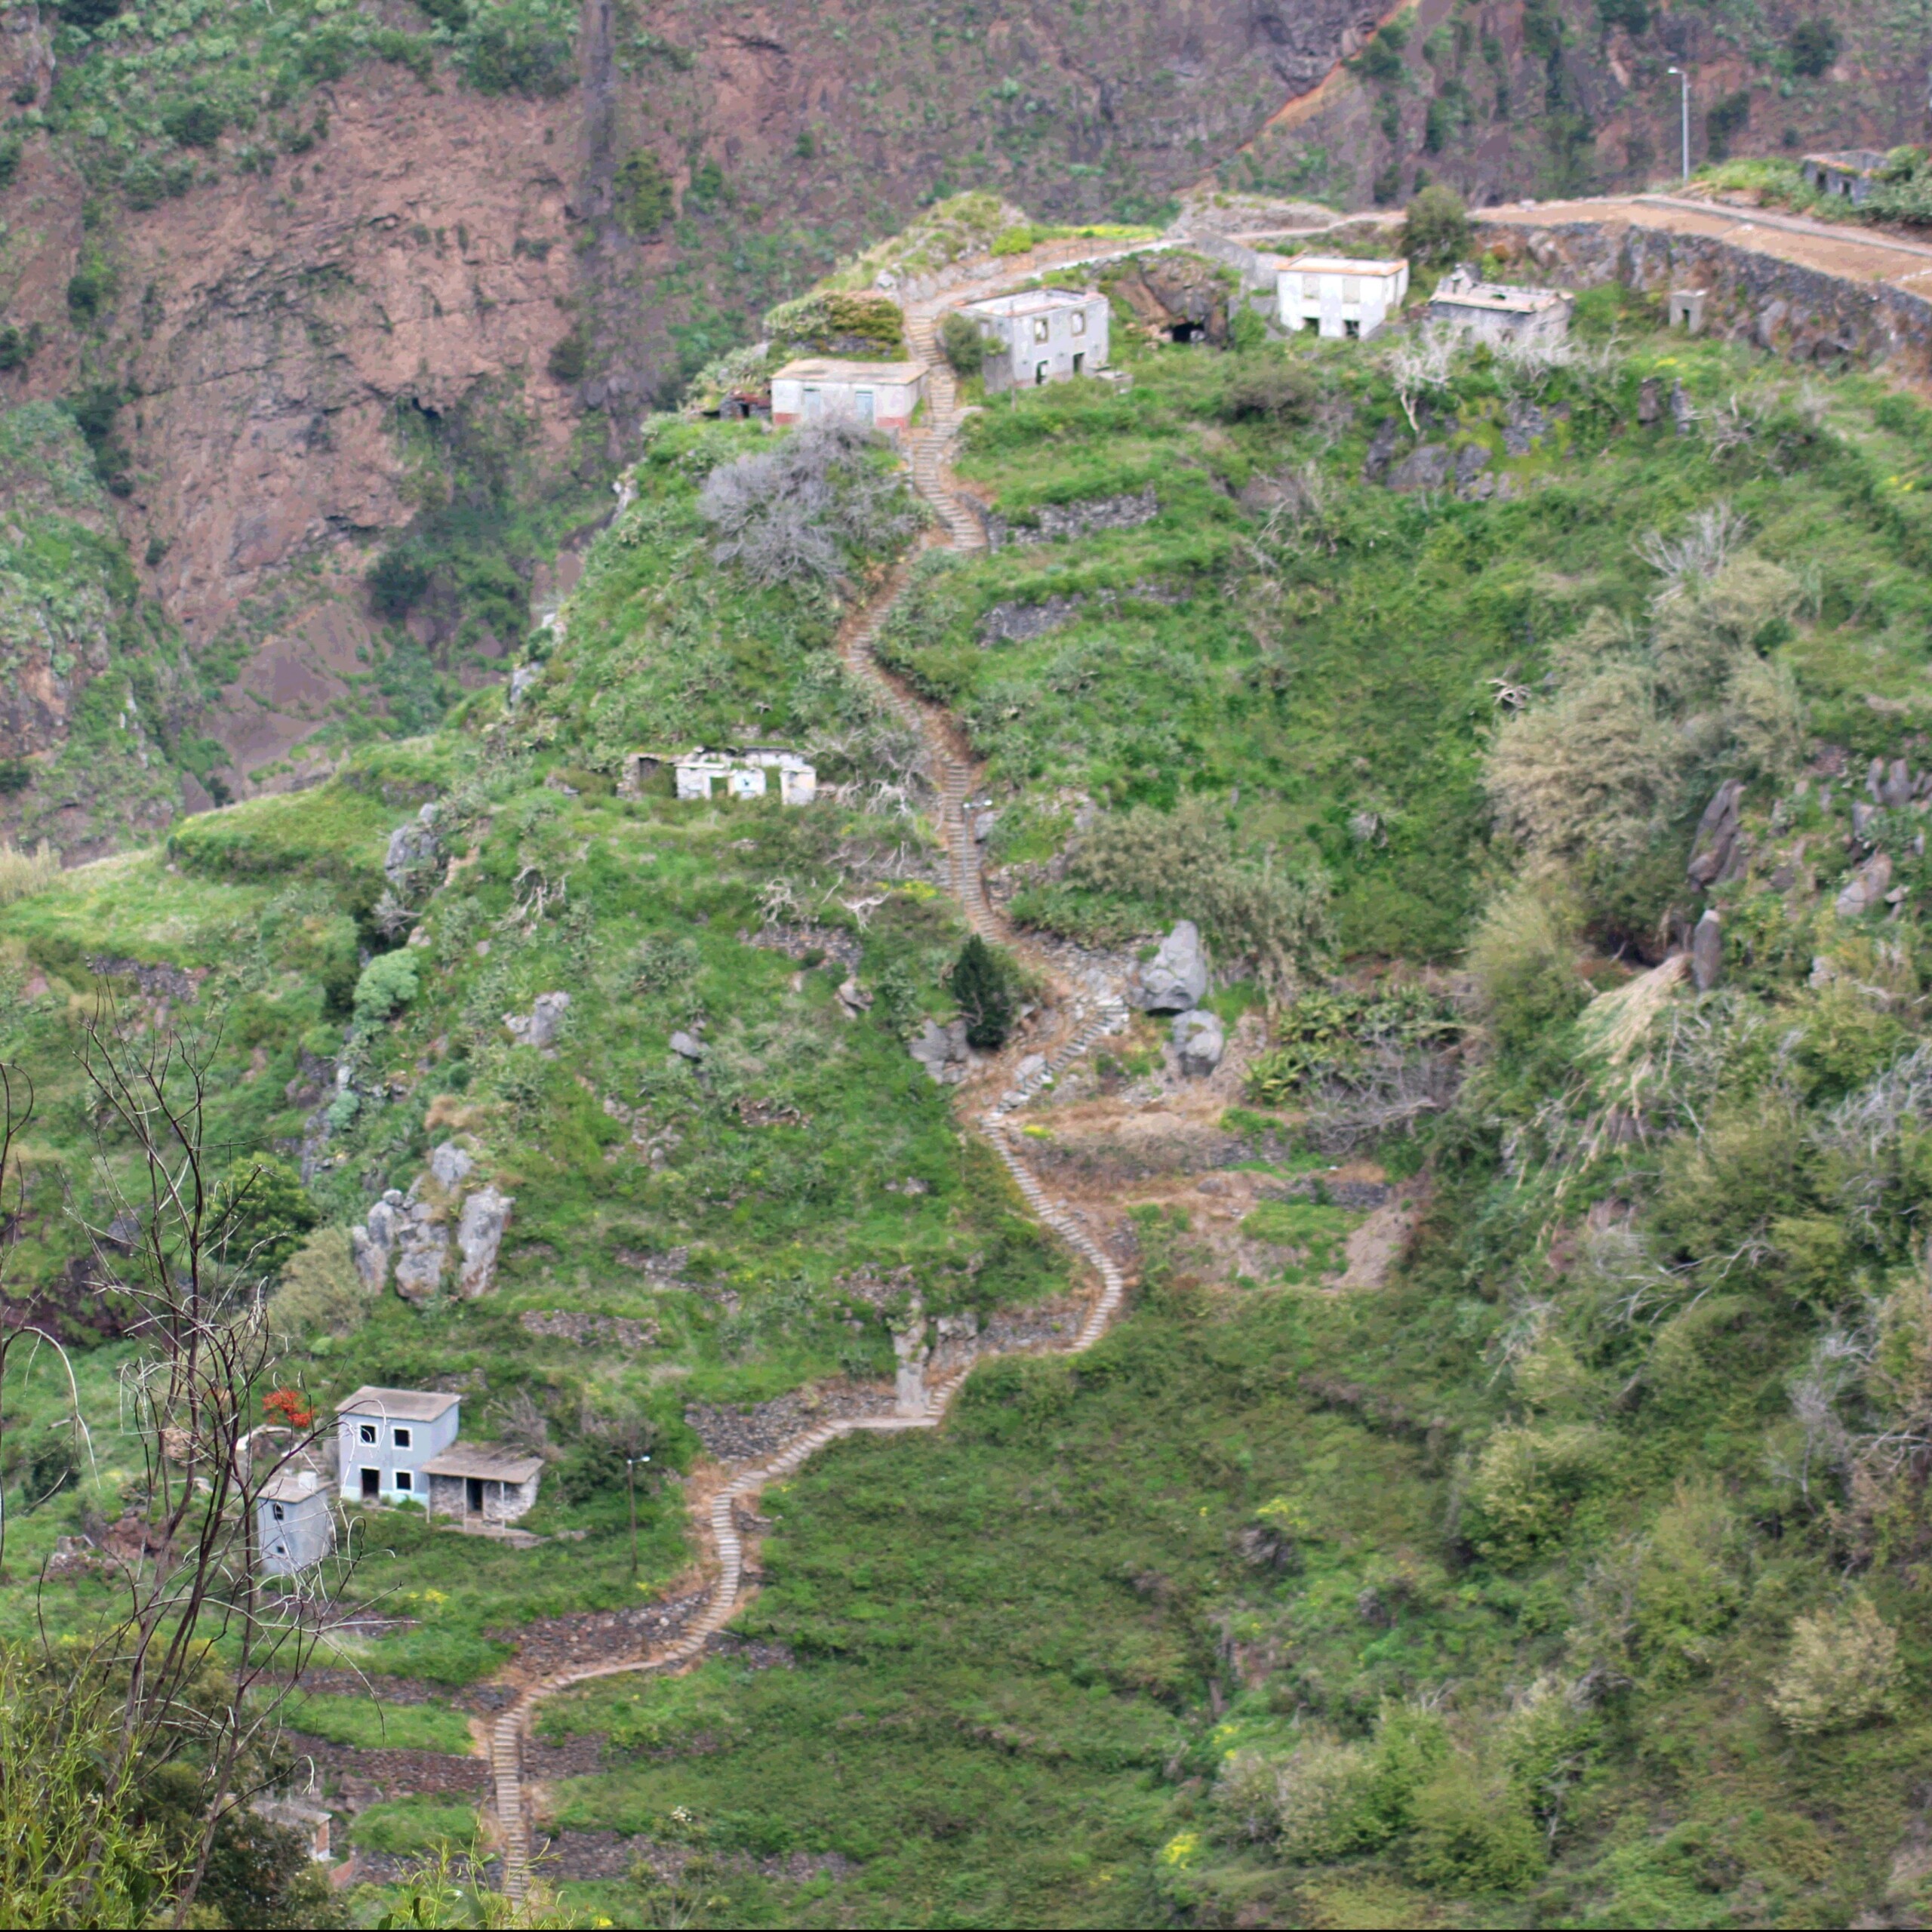 They call it the Madeiran Machu Picchu for being one of the most isolated villages of Madeira